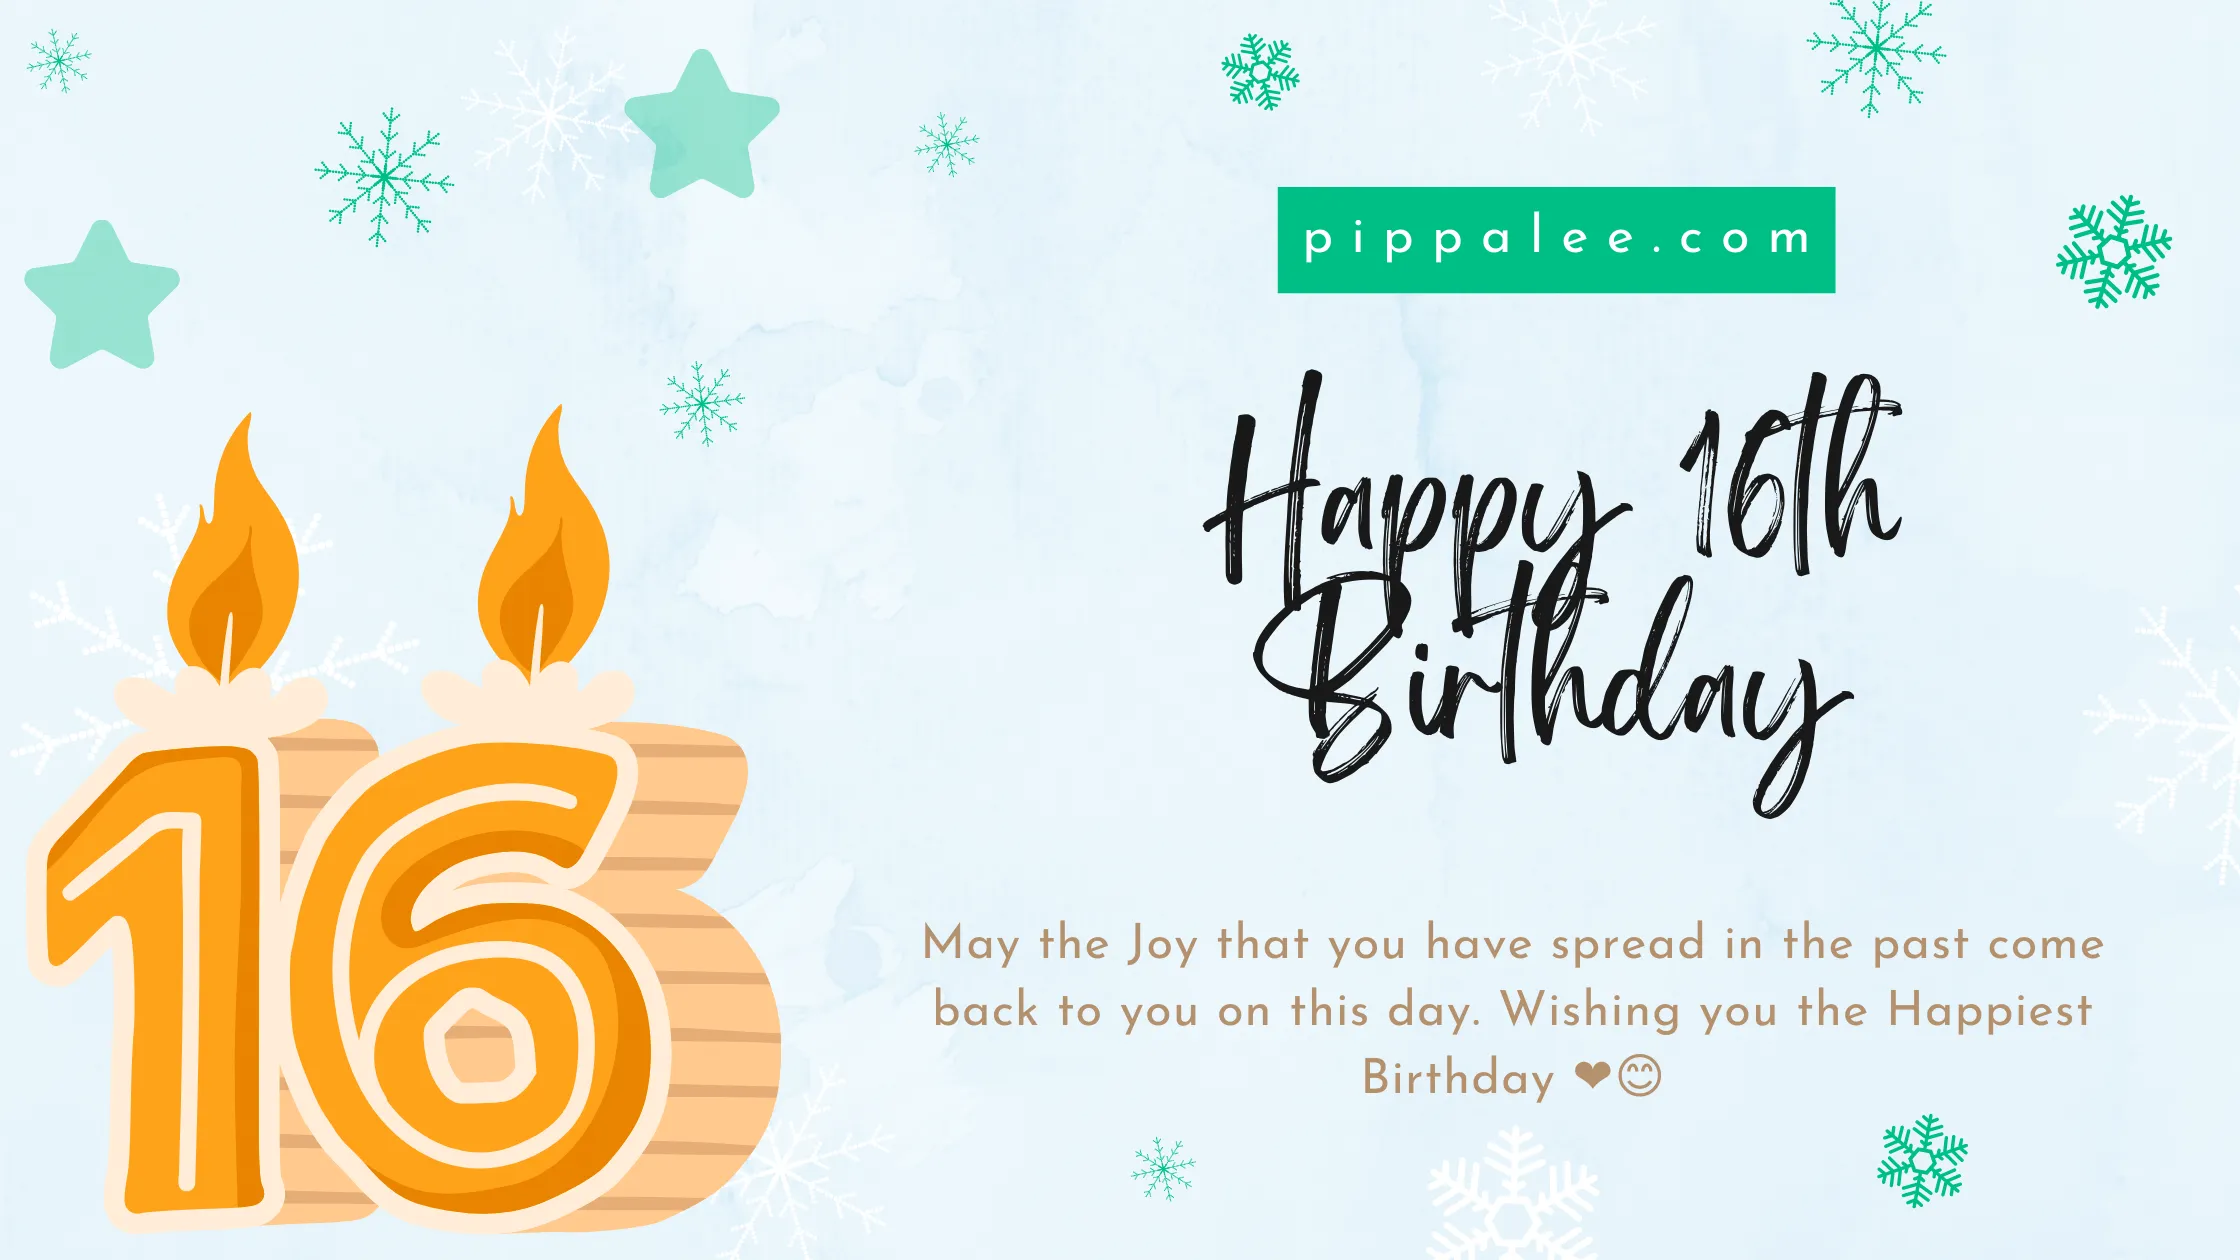 Happy 16th Birthday - Wishes & Messages